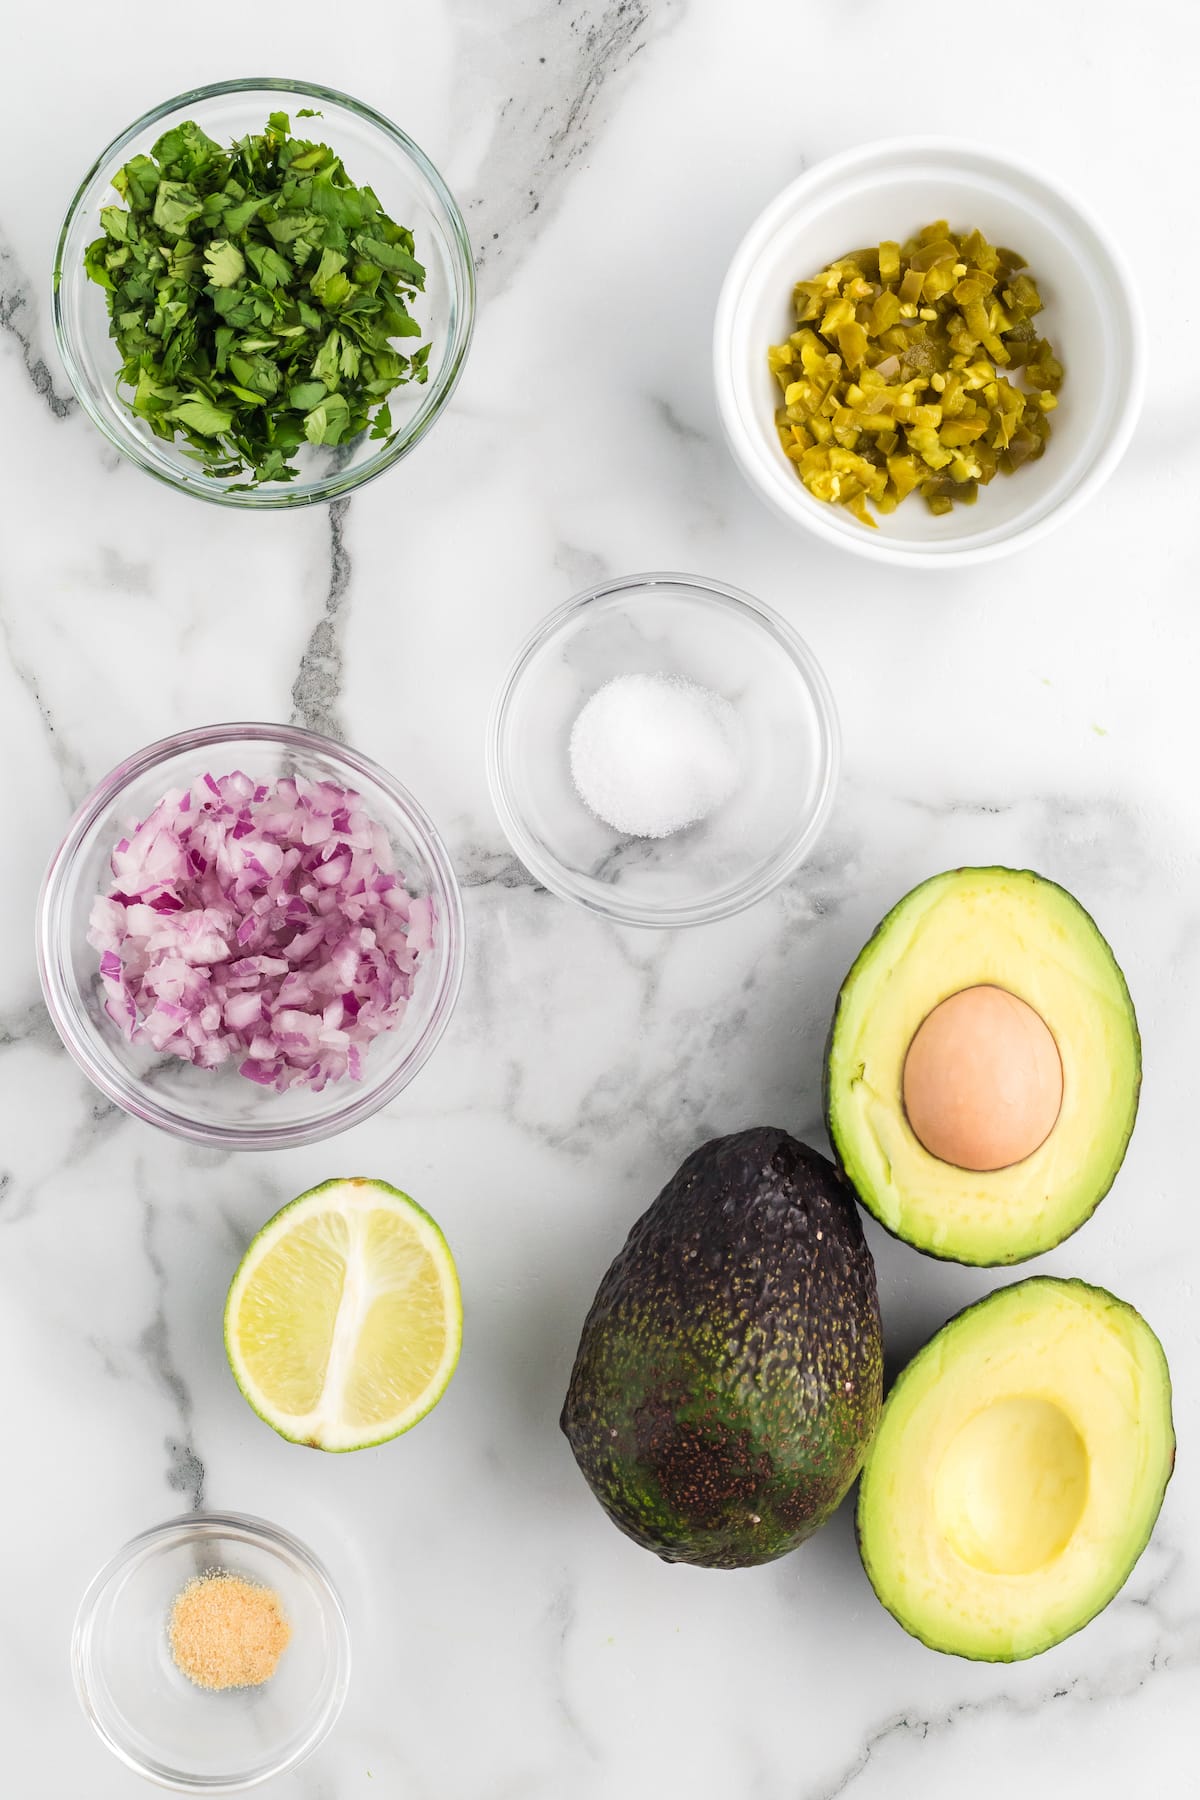 ingredients for homemade guacamole without tomatoes.